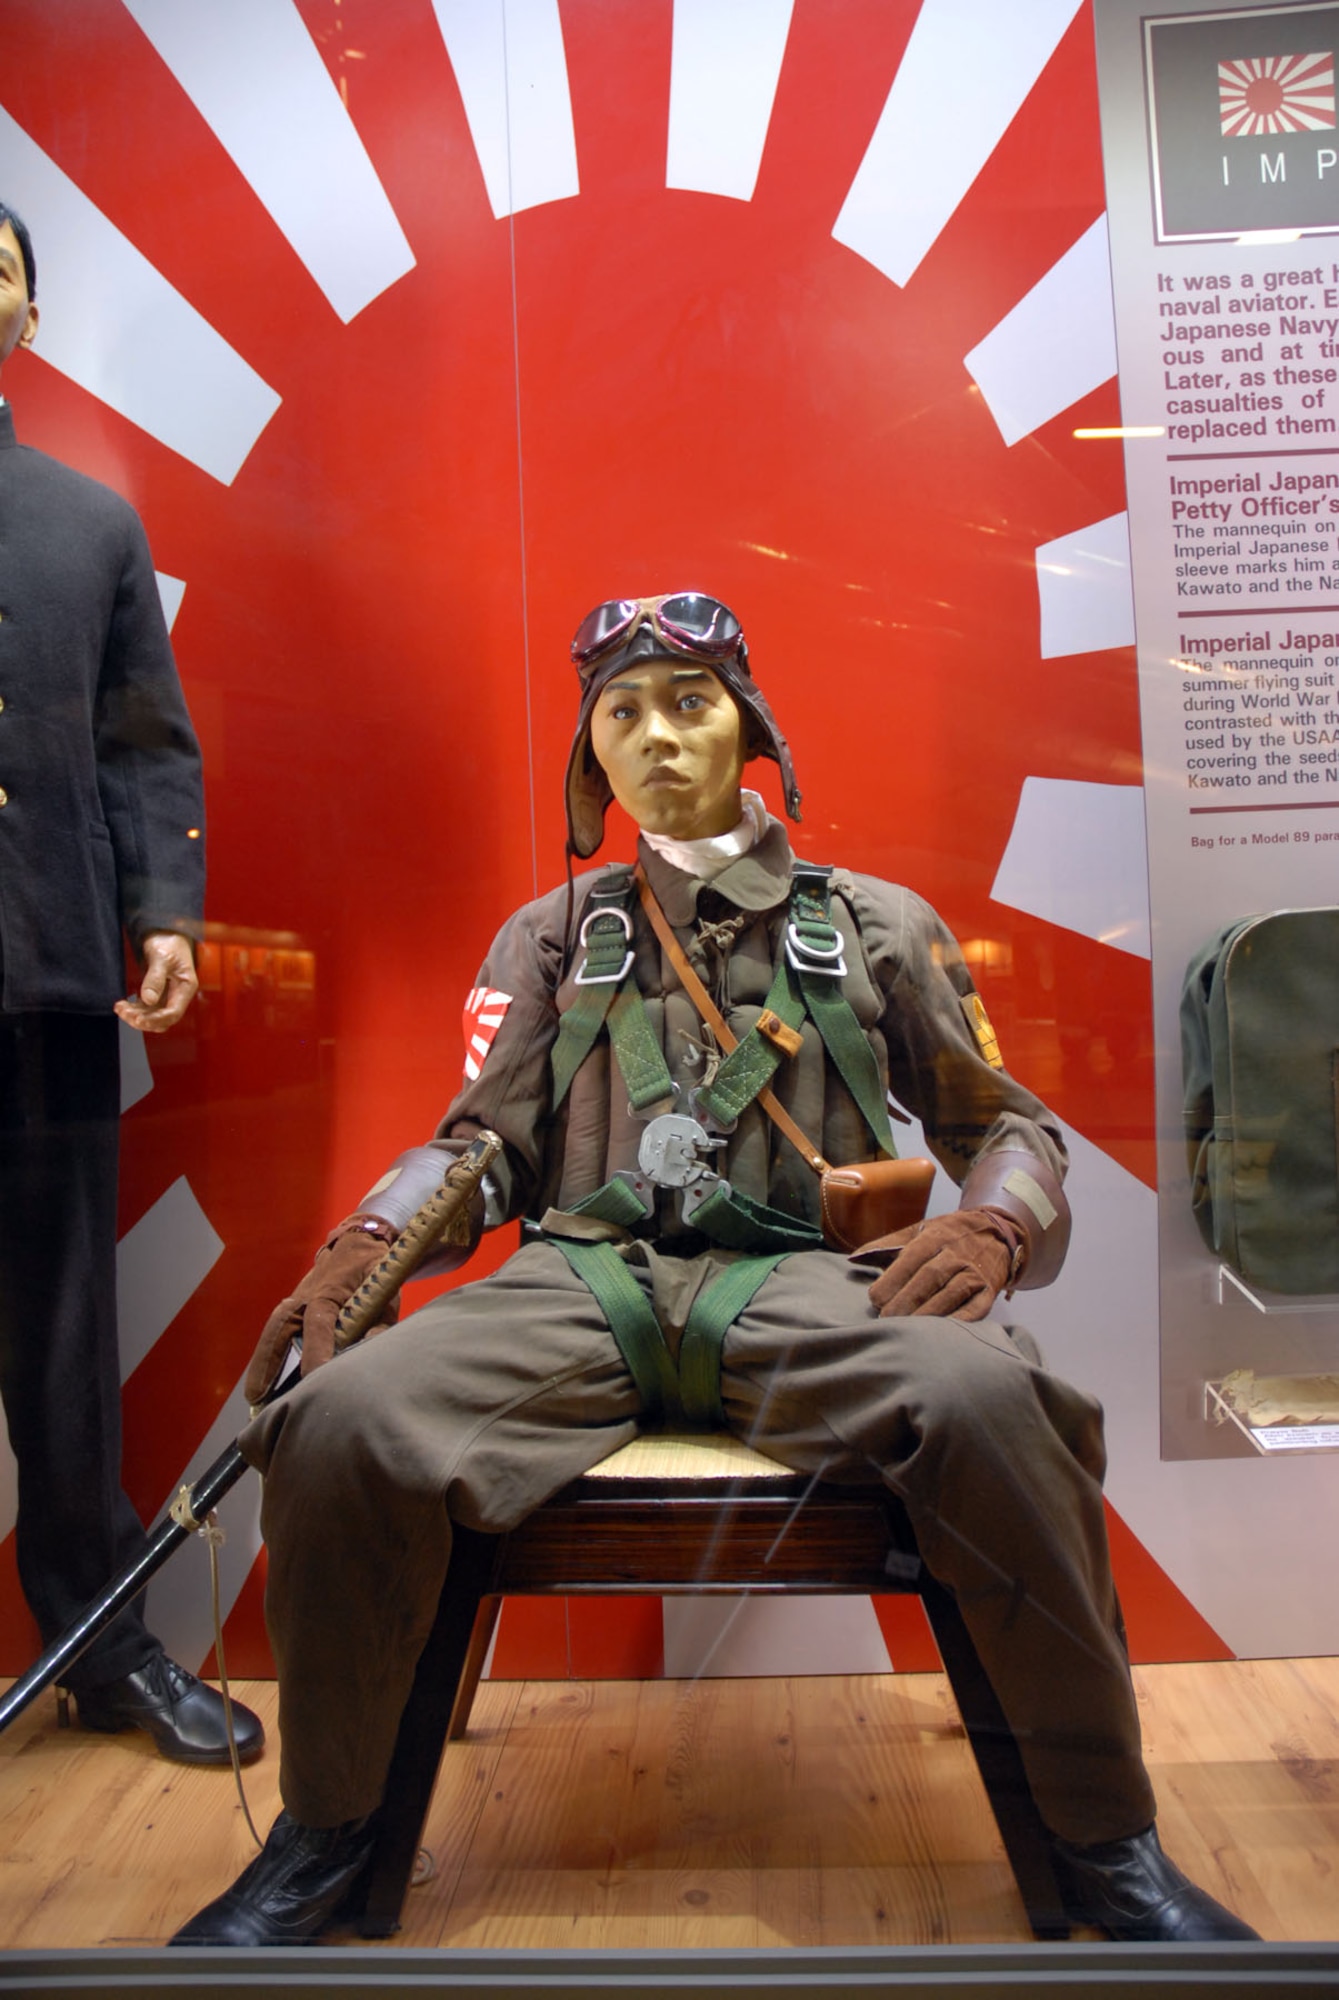 DAYTON, Ohio - The Japanese Imperial Navy Pilots portion of the WWII: Airmen in a World at War exhibit in the World War II Gallery at the National Museum of the U.S. Air Force. (U.S. Air Force photo)